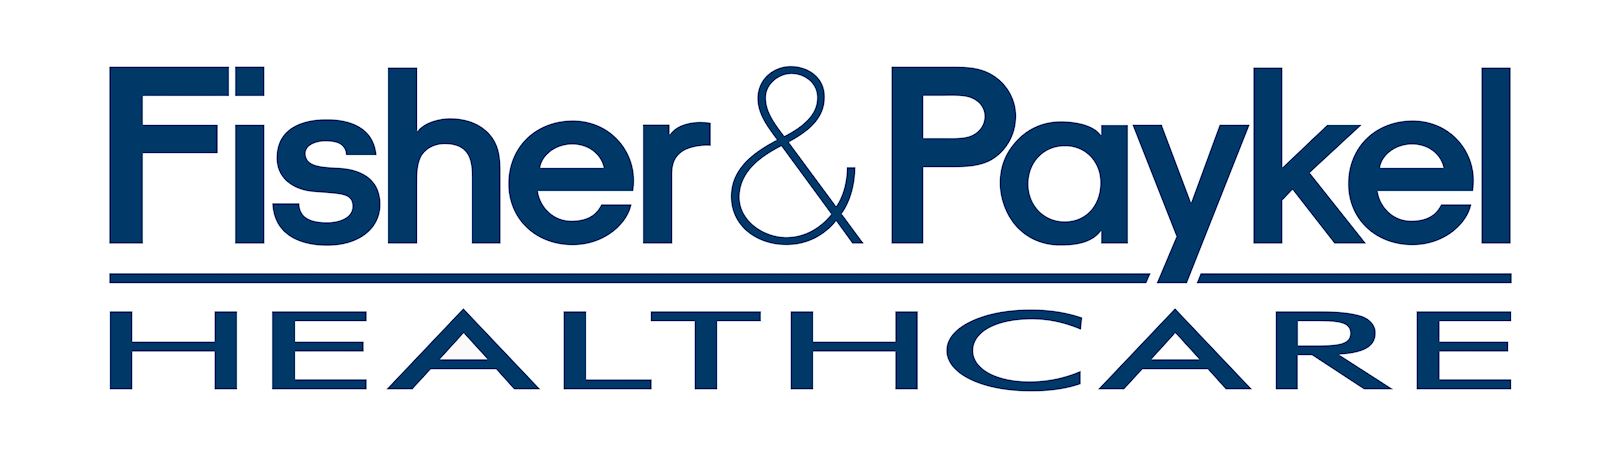 Fisher & Paykel Healthcare, Inc.